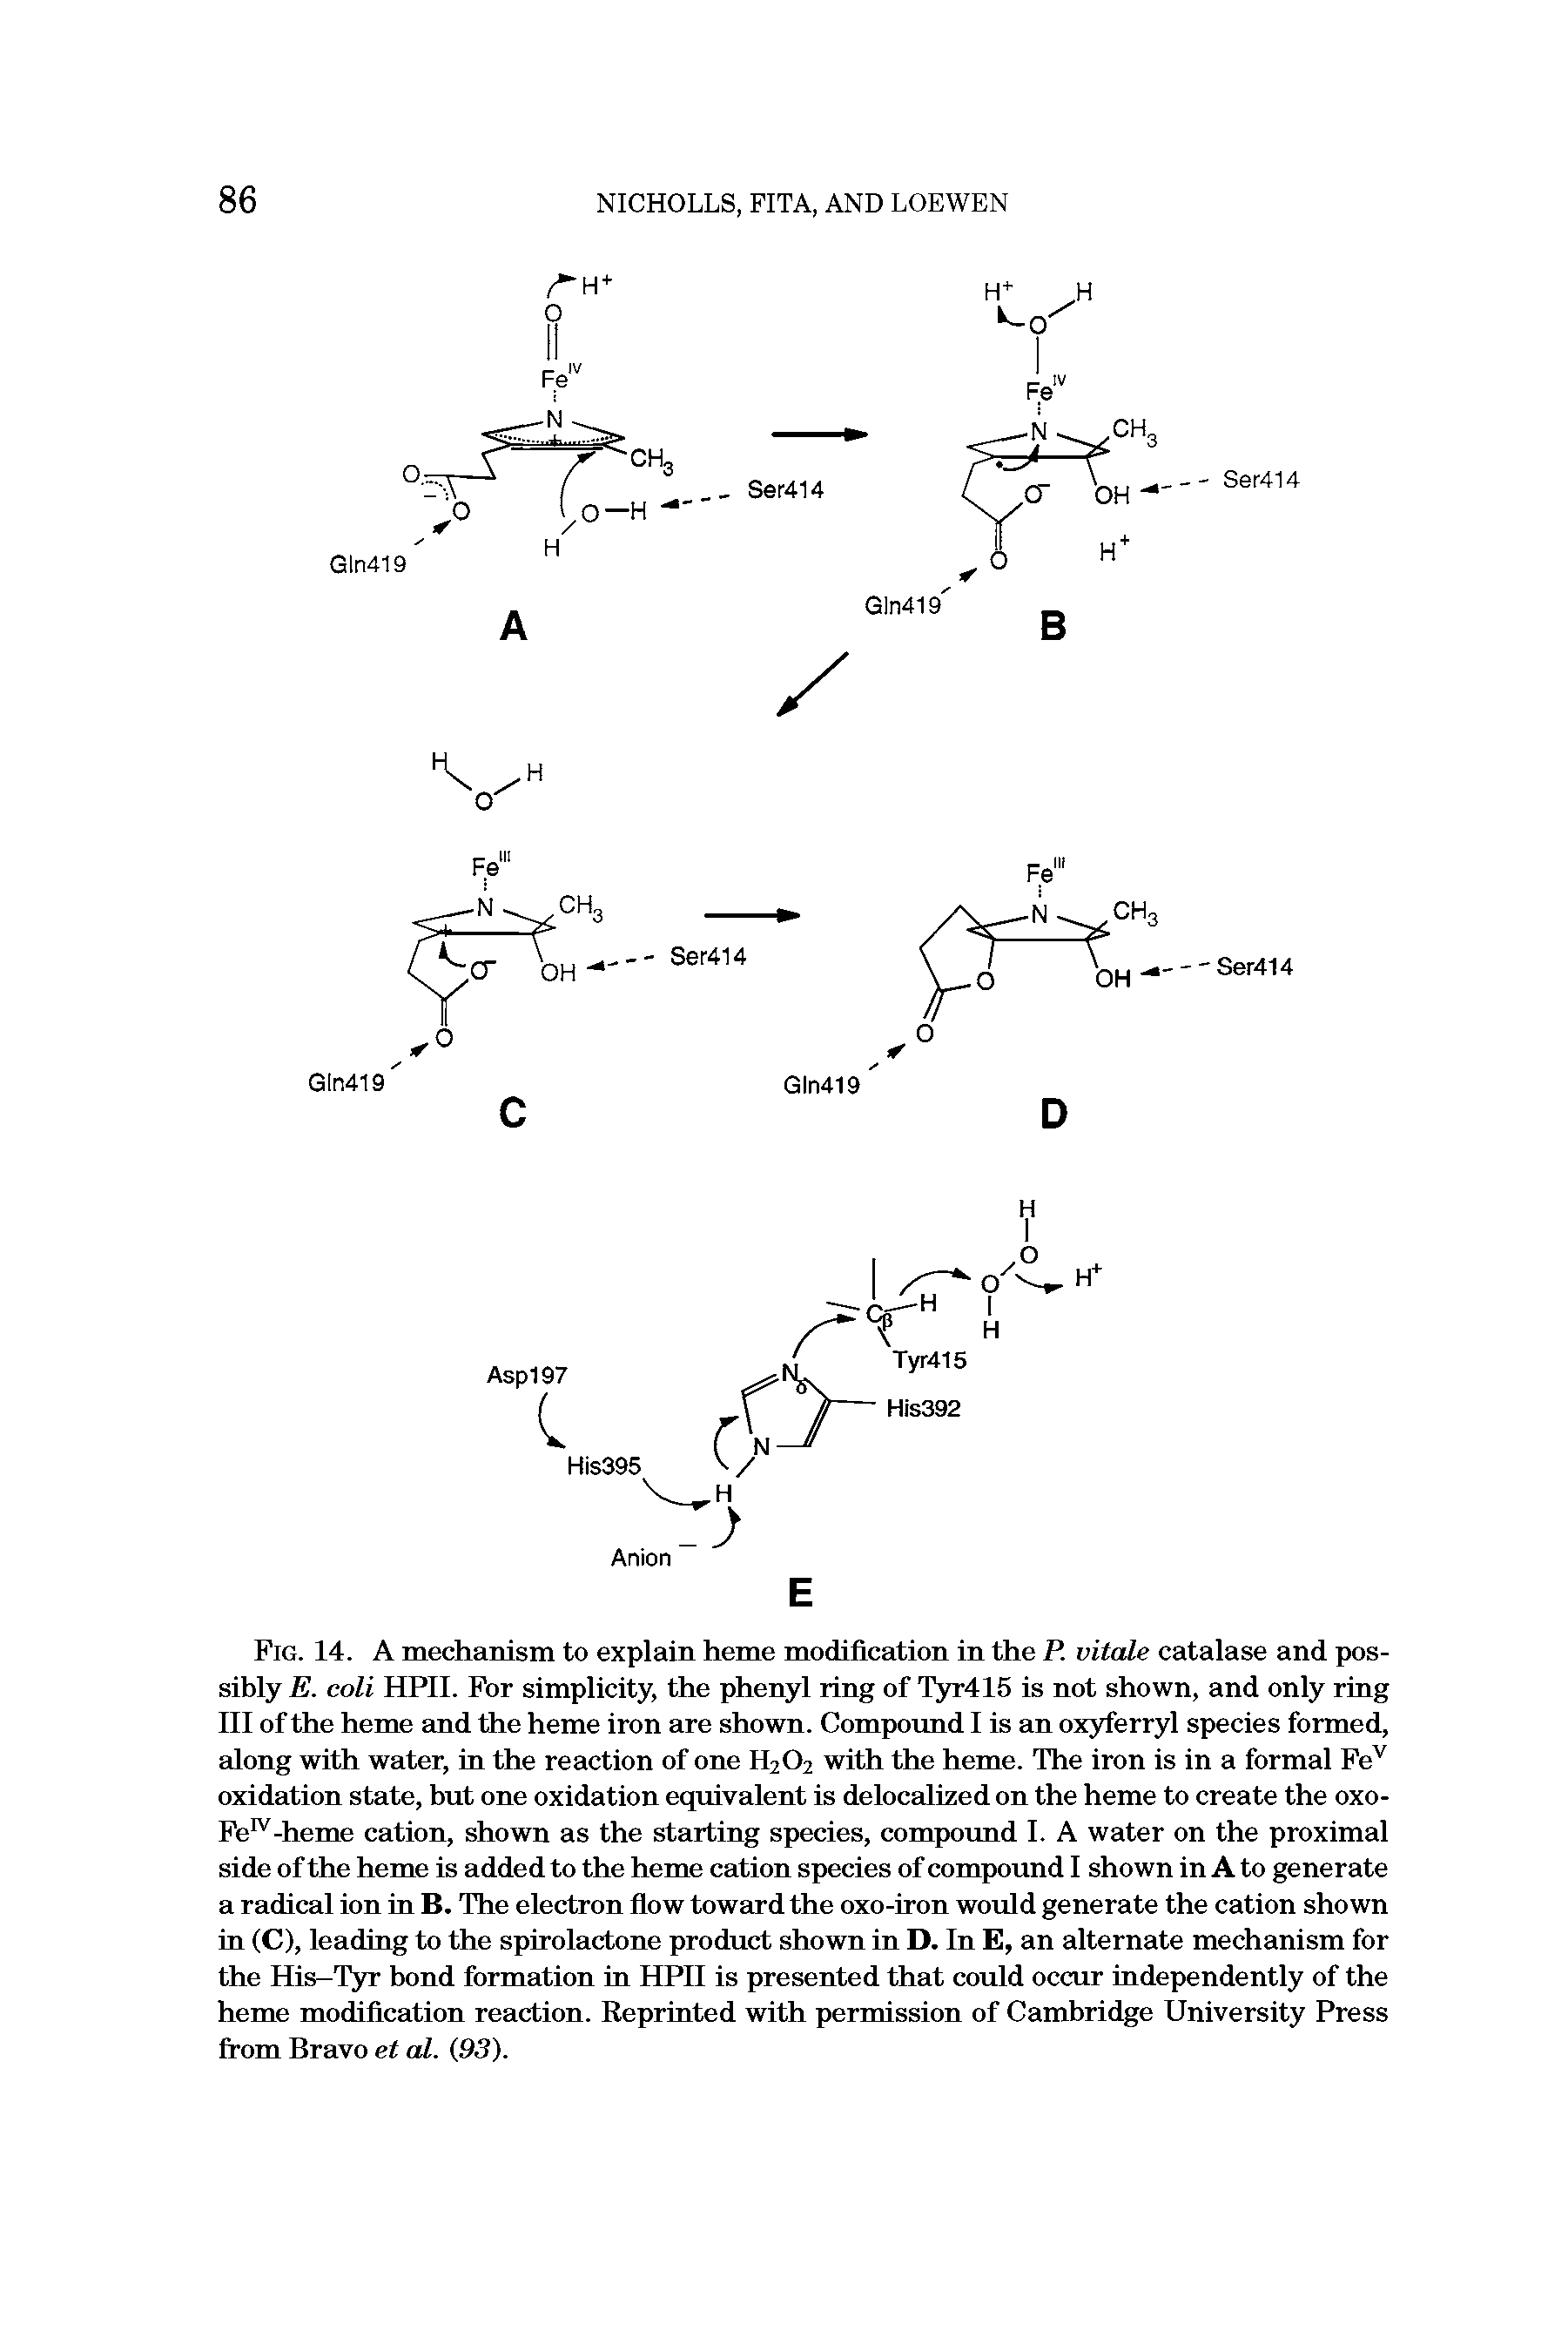 Fig. 14. A mechanism to explain heme modification in the P. vitcde catalase and possibly E. coli HPII. For simplicity, the phenyl ring of T3rr415 is not shown, and only ring III of the heme and the heme iron are shown. Compound I is an oxyferryl species formed, along with water, in the reaction of one H2O2 with the heme. The iron is in a formal Fe oxidation state, but one oxidation equivalent is delocalized on the heme to create the 0x0-Fe" -heme cation, shown as the starting species, compound I. A water on the proximal side of the heme is added to the heme cation species of compound 1 shown in A to generate a radical ion in B. The electron flow toward the oxo-iron would generate the cation shown in (C), leading to the spirolactone product shown in D. In E, an alternate mechanism for the His-Tyr bond formation in HPII is presented that could occur independently of the heme modification reaction. Reprinted with permission of Cambridge University Press from Bravo et al. (93).